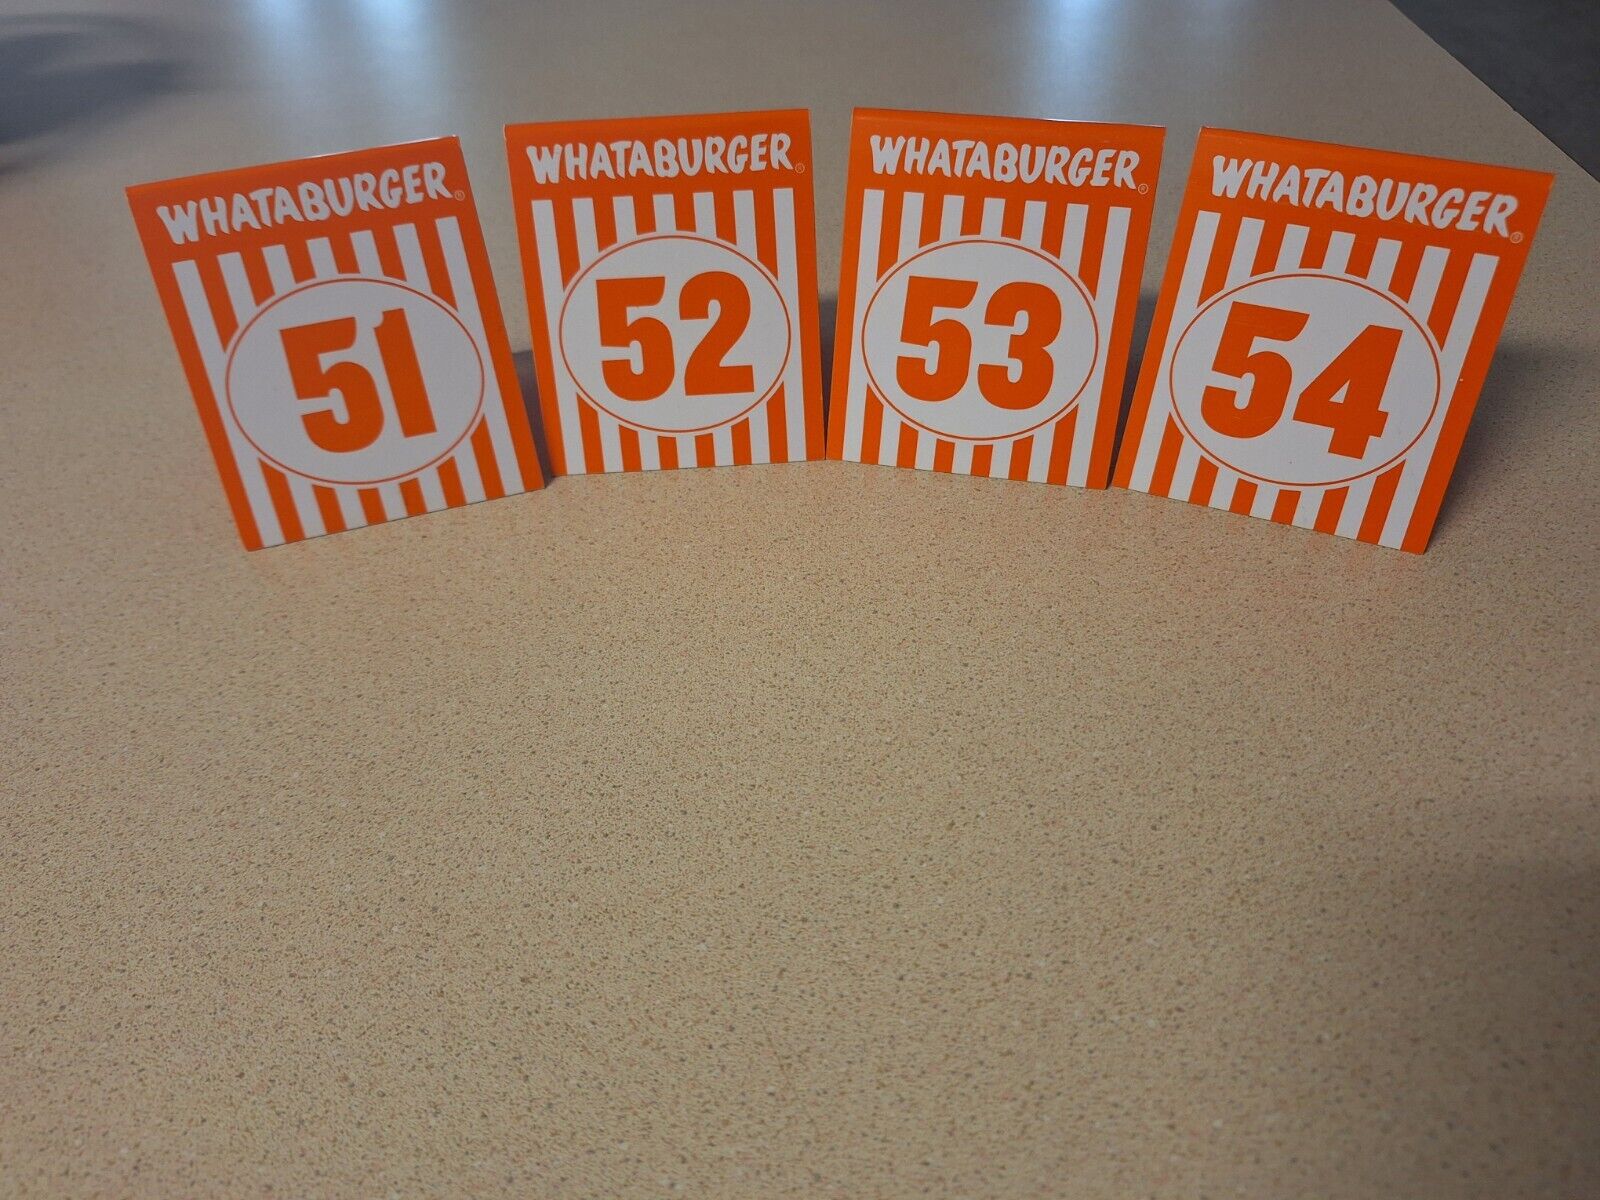 Whataburger Restaurant Table Tent Order Number Collection 51,52,53,54 Ships Free